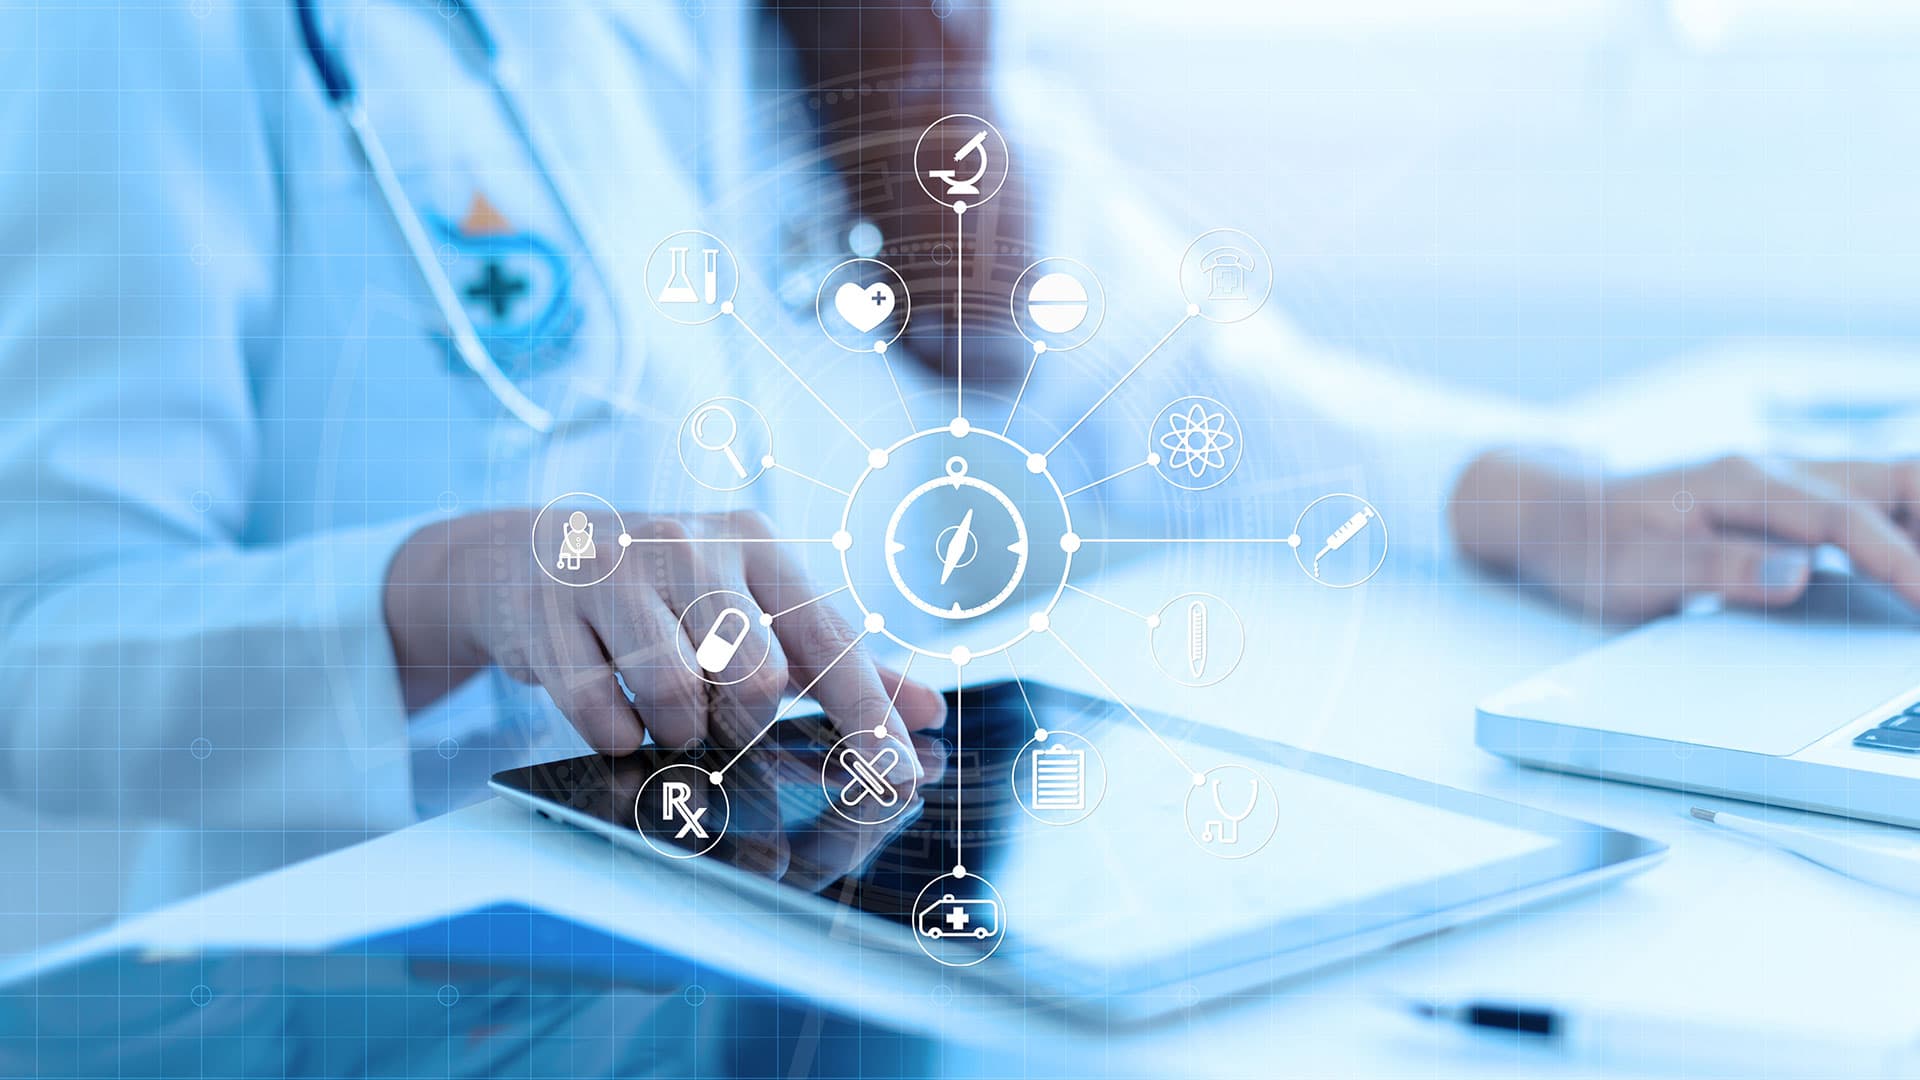 Patient Navigation through the healthcare system